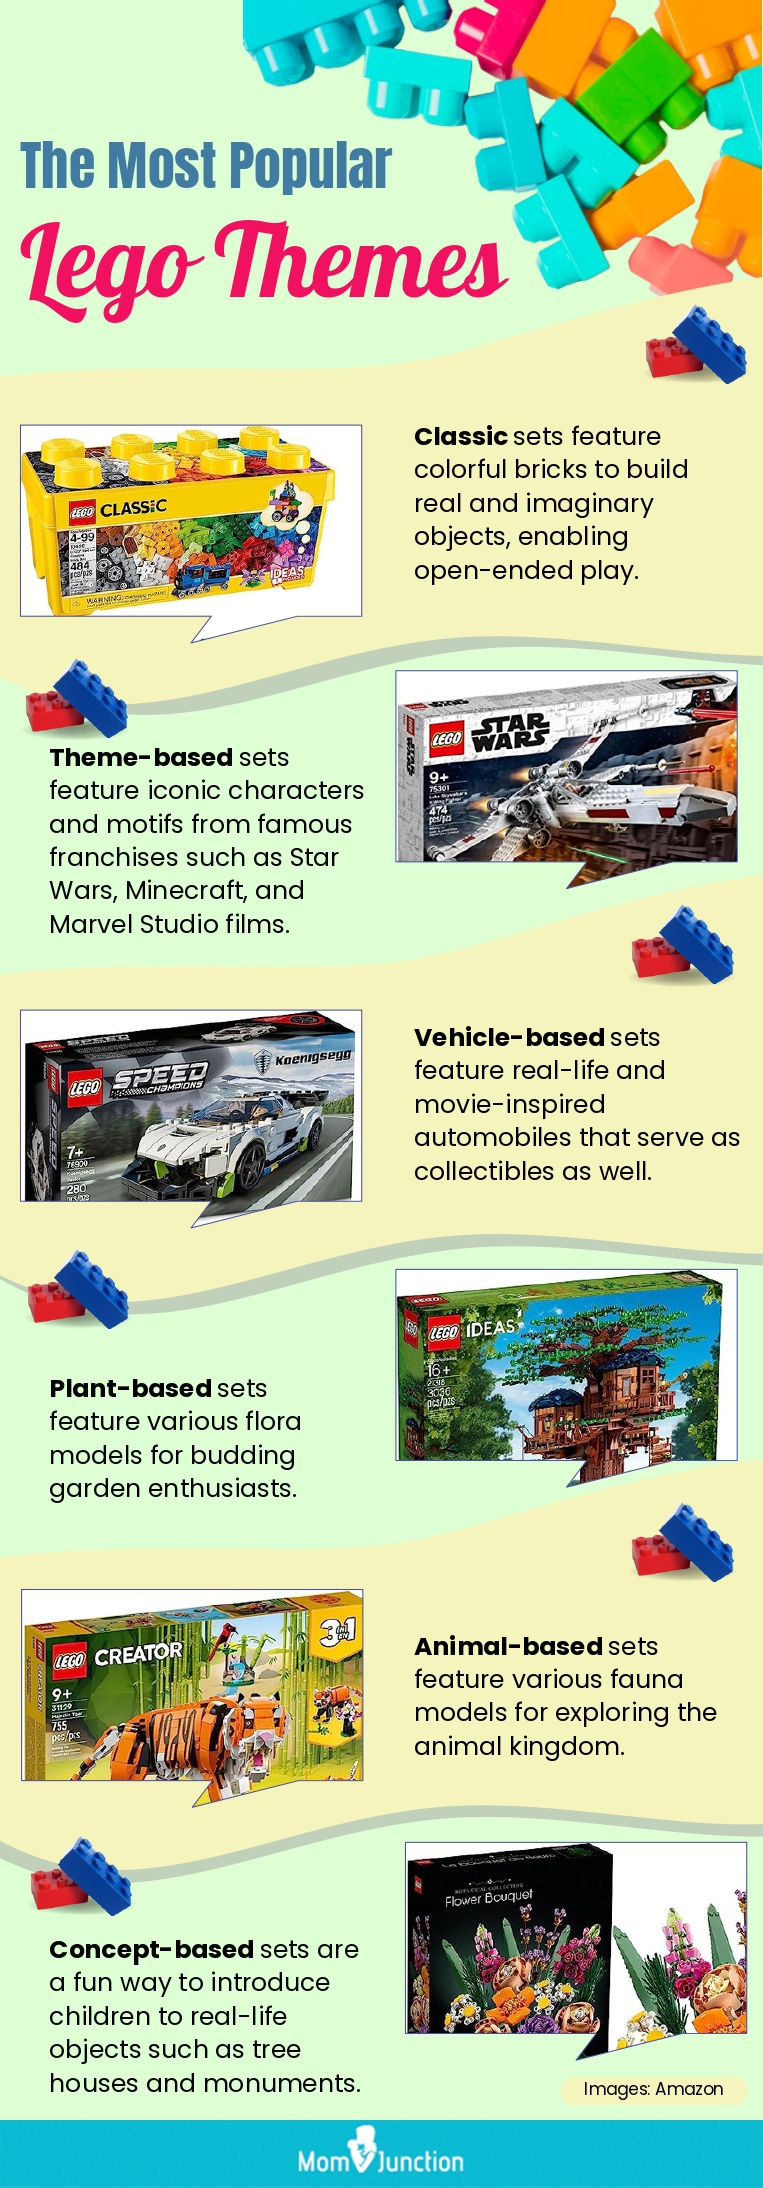 The Most Popular Lego Themes (infographic)